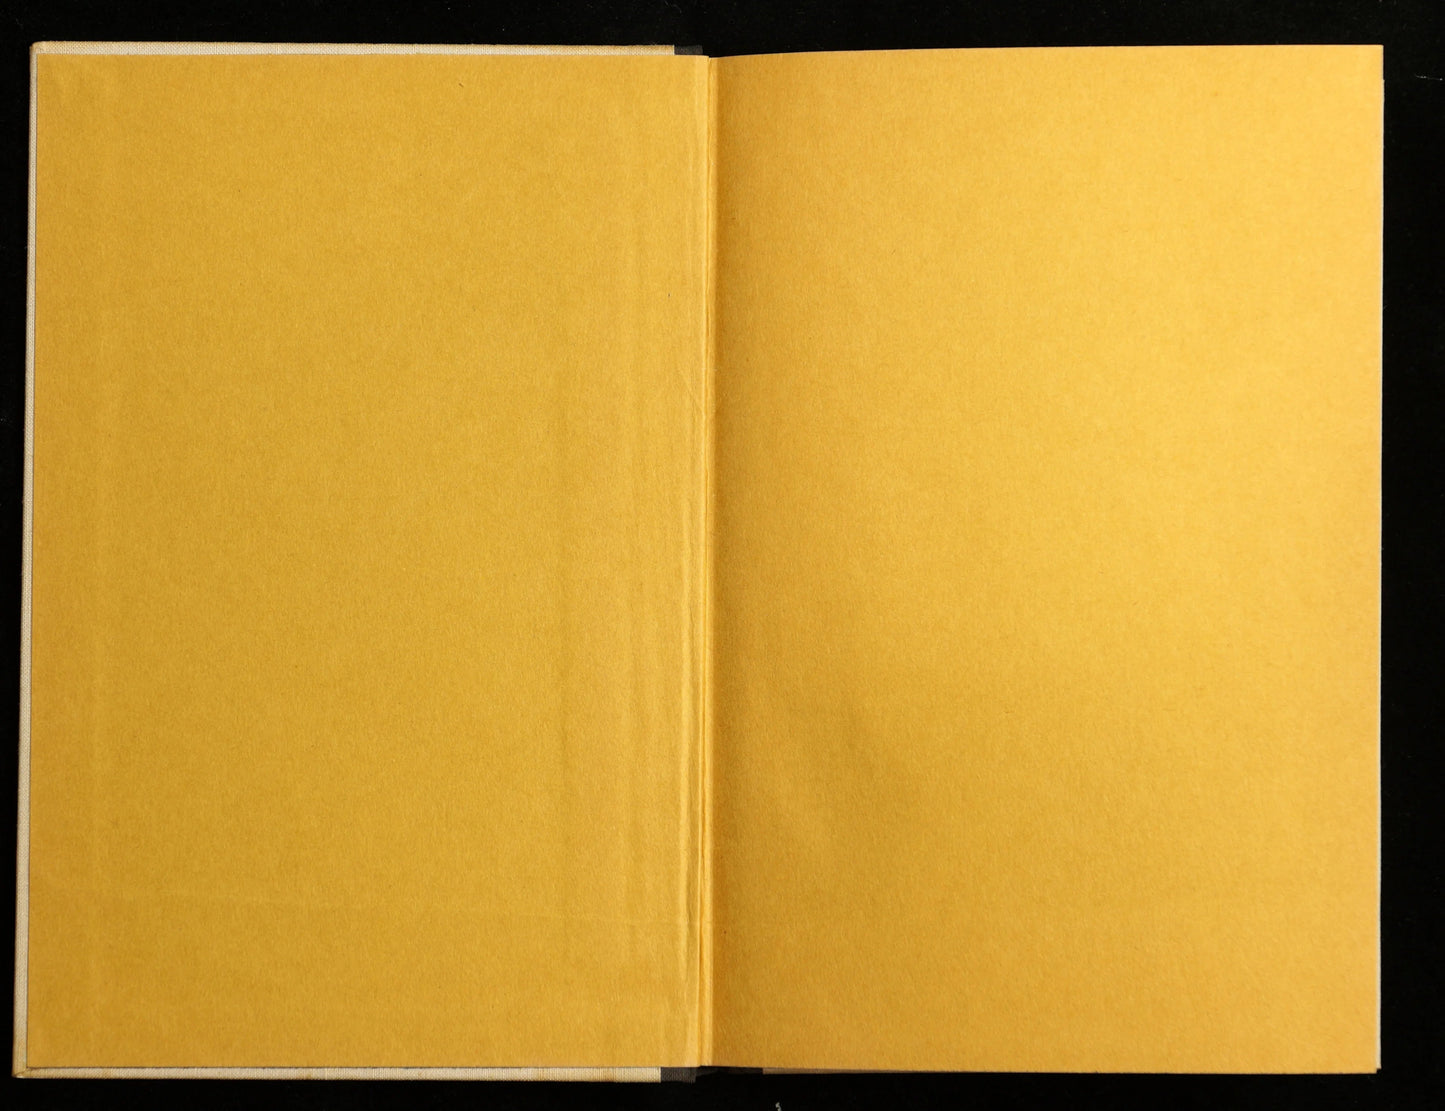 The (Diblos) Notebook: James Merrill, First Edition - 1965 - Bear and Raven Antiques